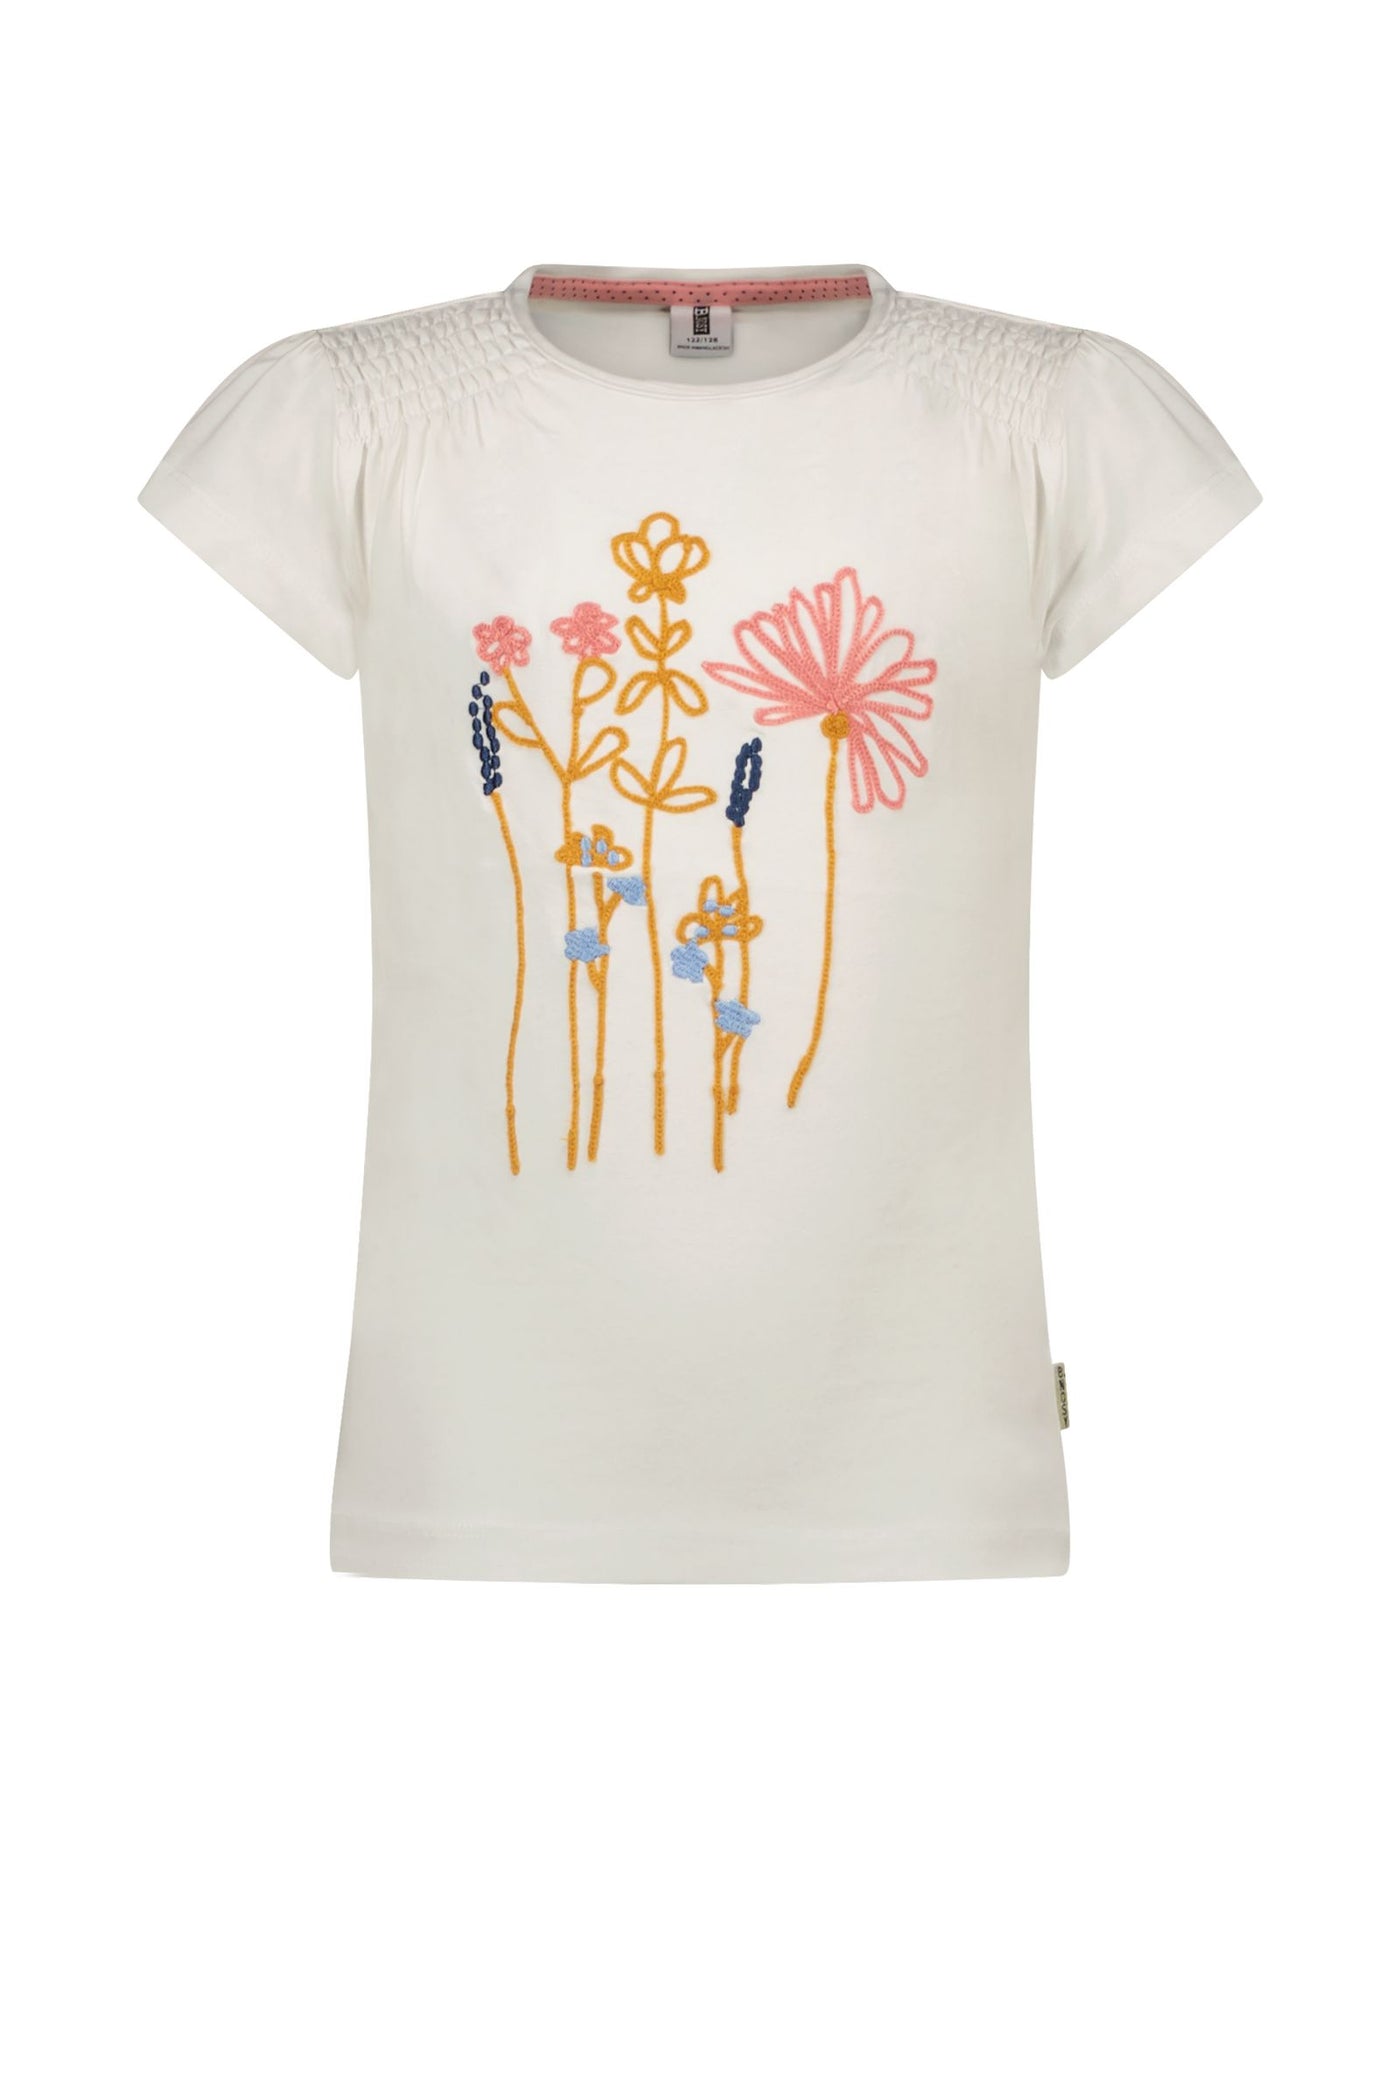 B-nosy - Girls short sleeve t-shirt with flower embroidery on chest - Maya blue